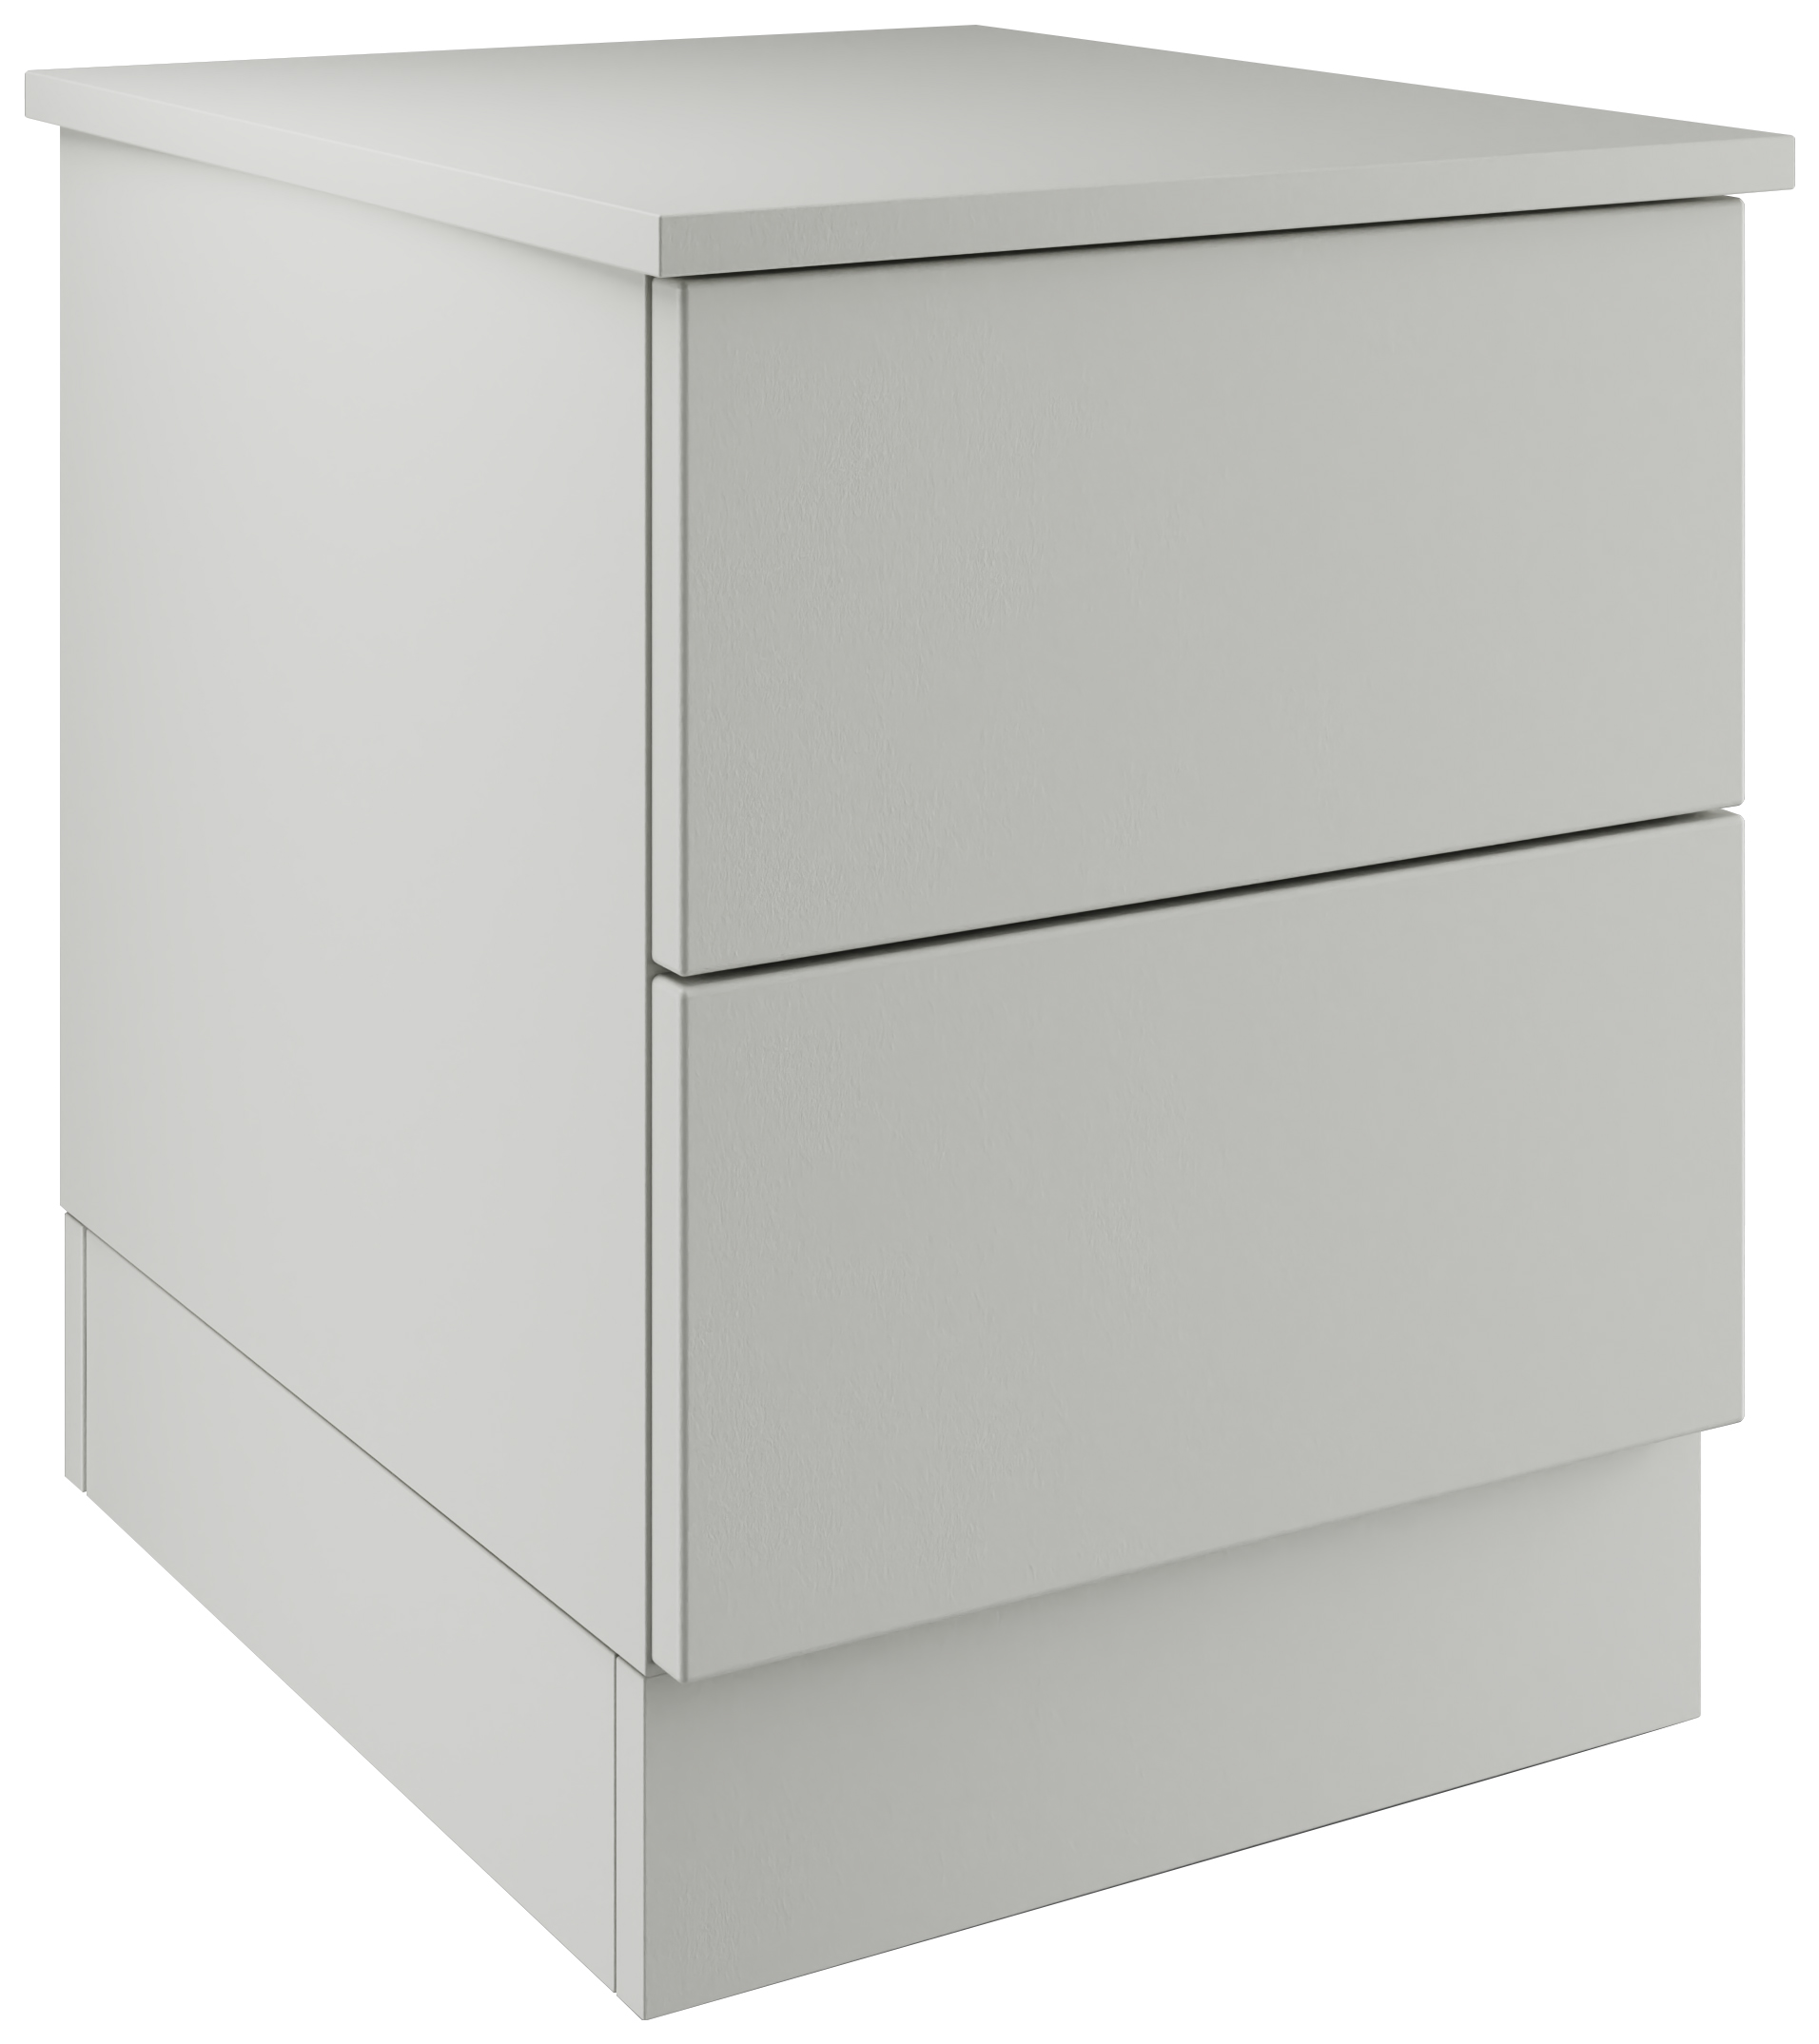 Malton Light Grey Bedside Chest with 2 Drawers - 420 x 527 x 520mm